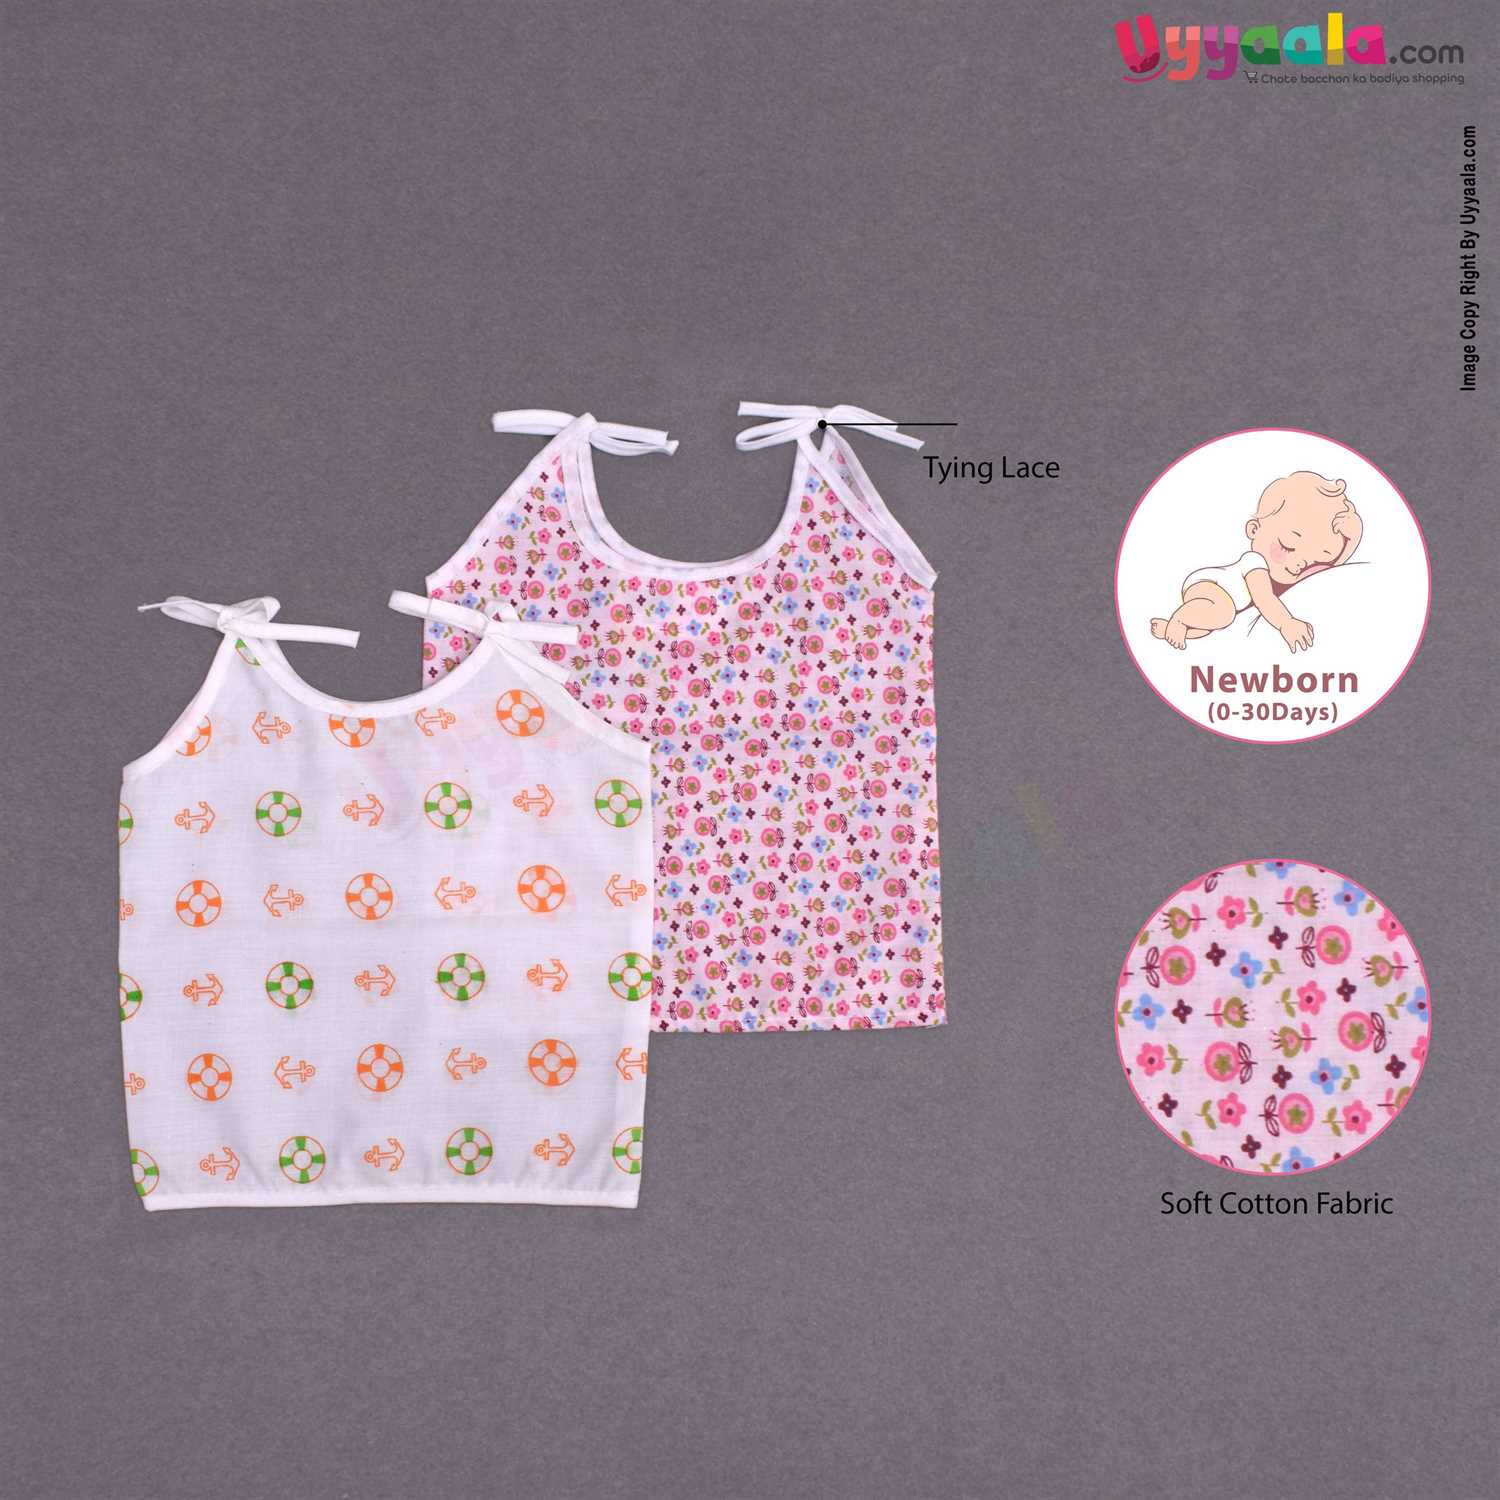 Sleeveless Baby Jabla Set, Top Opening Tie knot Lace Model, (0-30 Days), Floral & Anchor Print, 2Pack - Pink & White